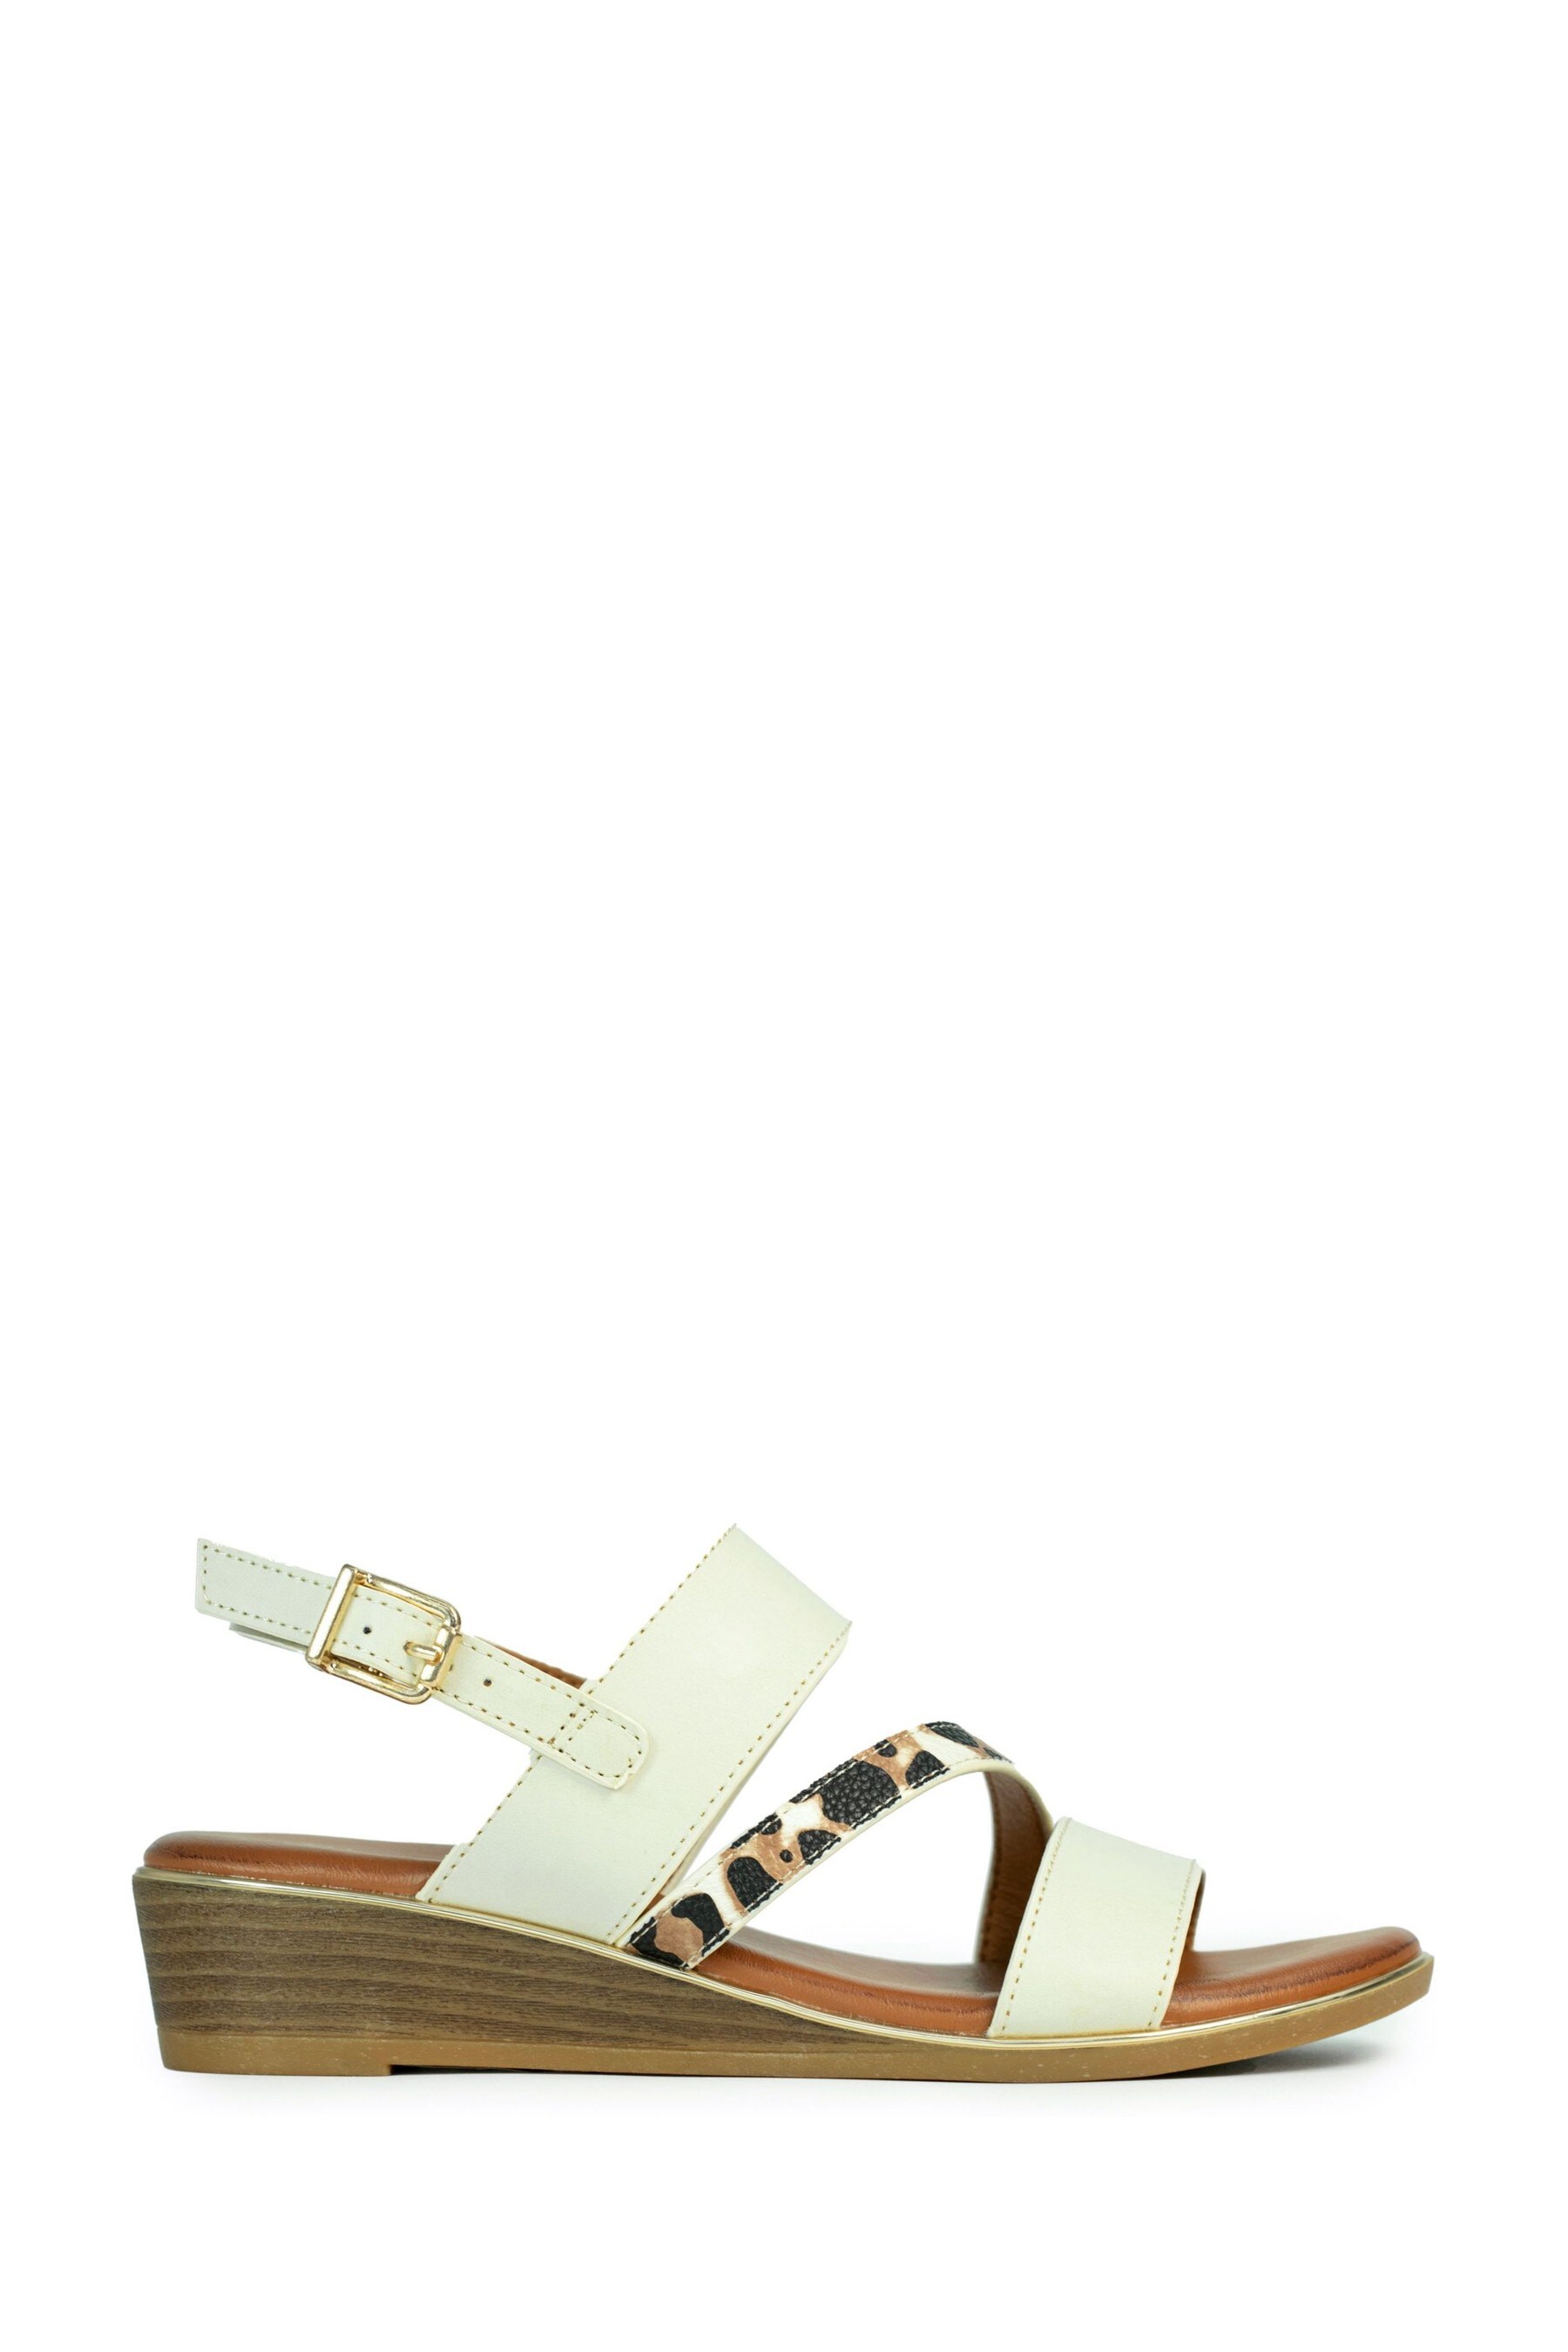 Buy Lunar Natural Jessica Wedge Sandals from the Next UK online shop